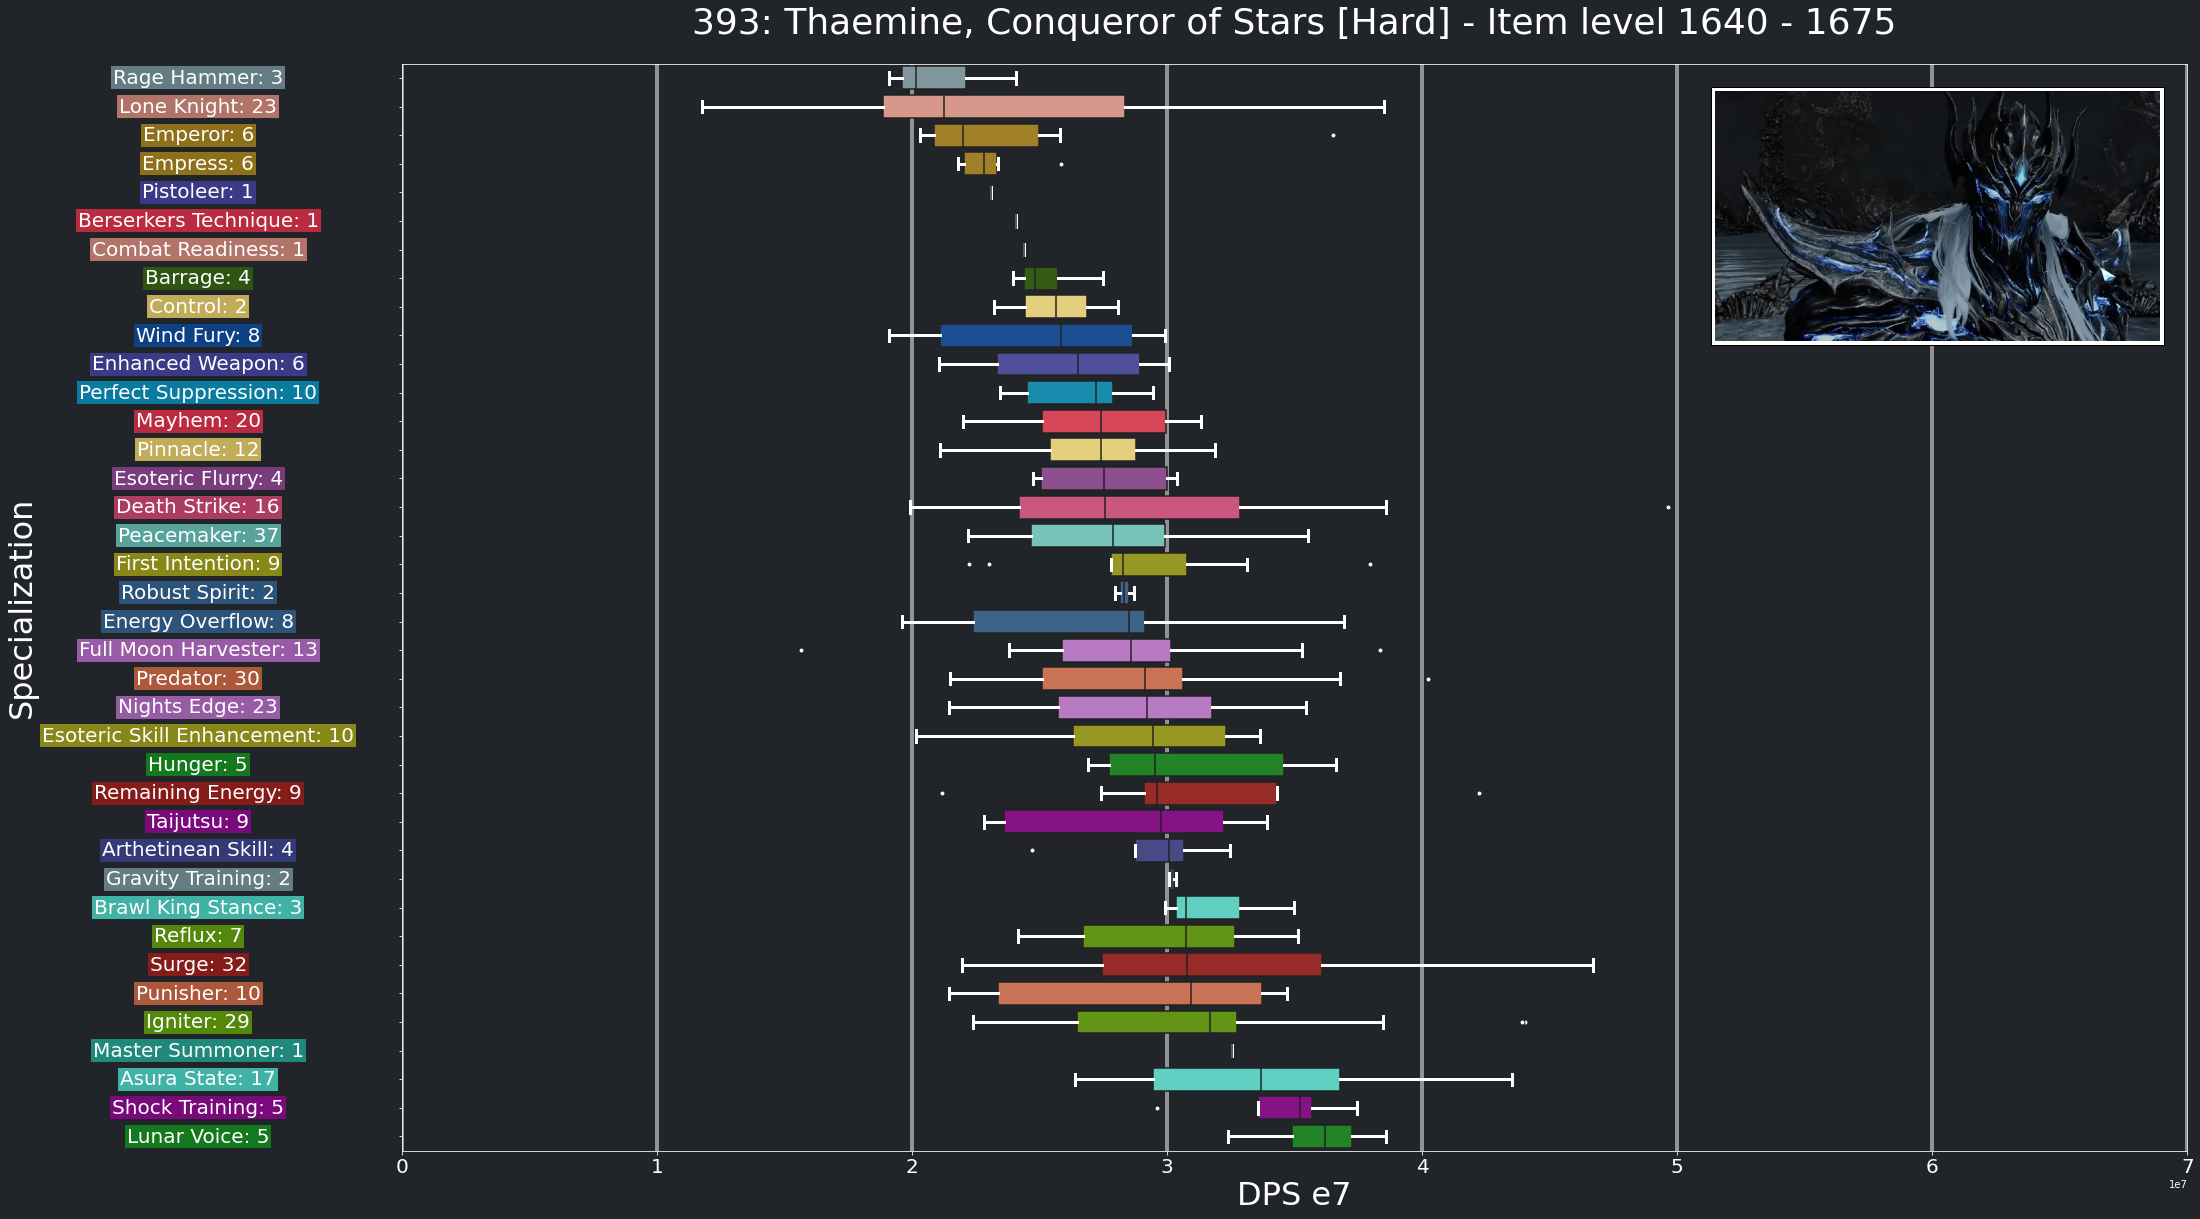 DPS_Thaemine,ConquerorofStarsHard_1640to1675_Median.png